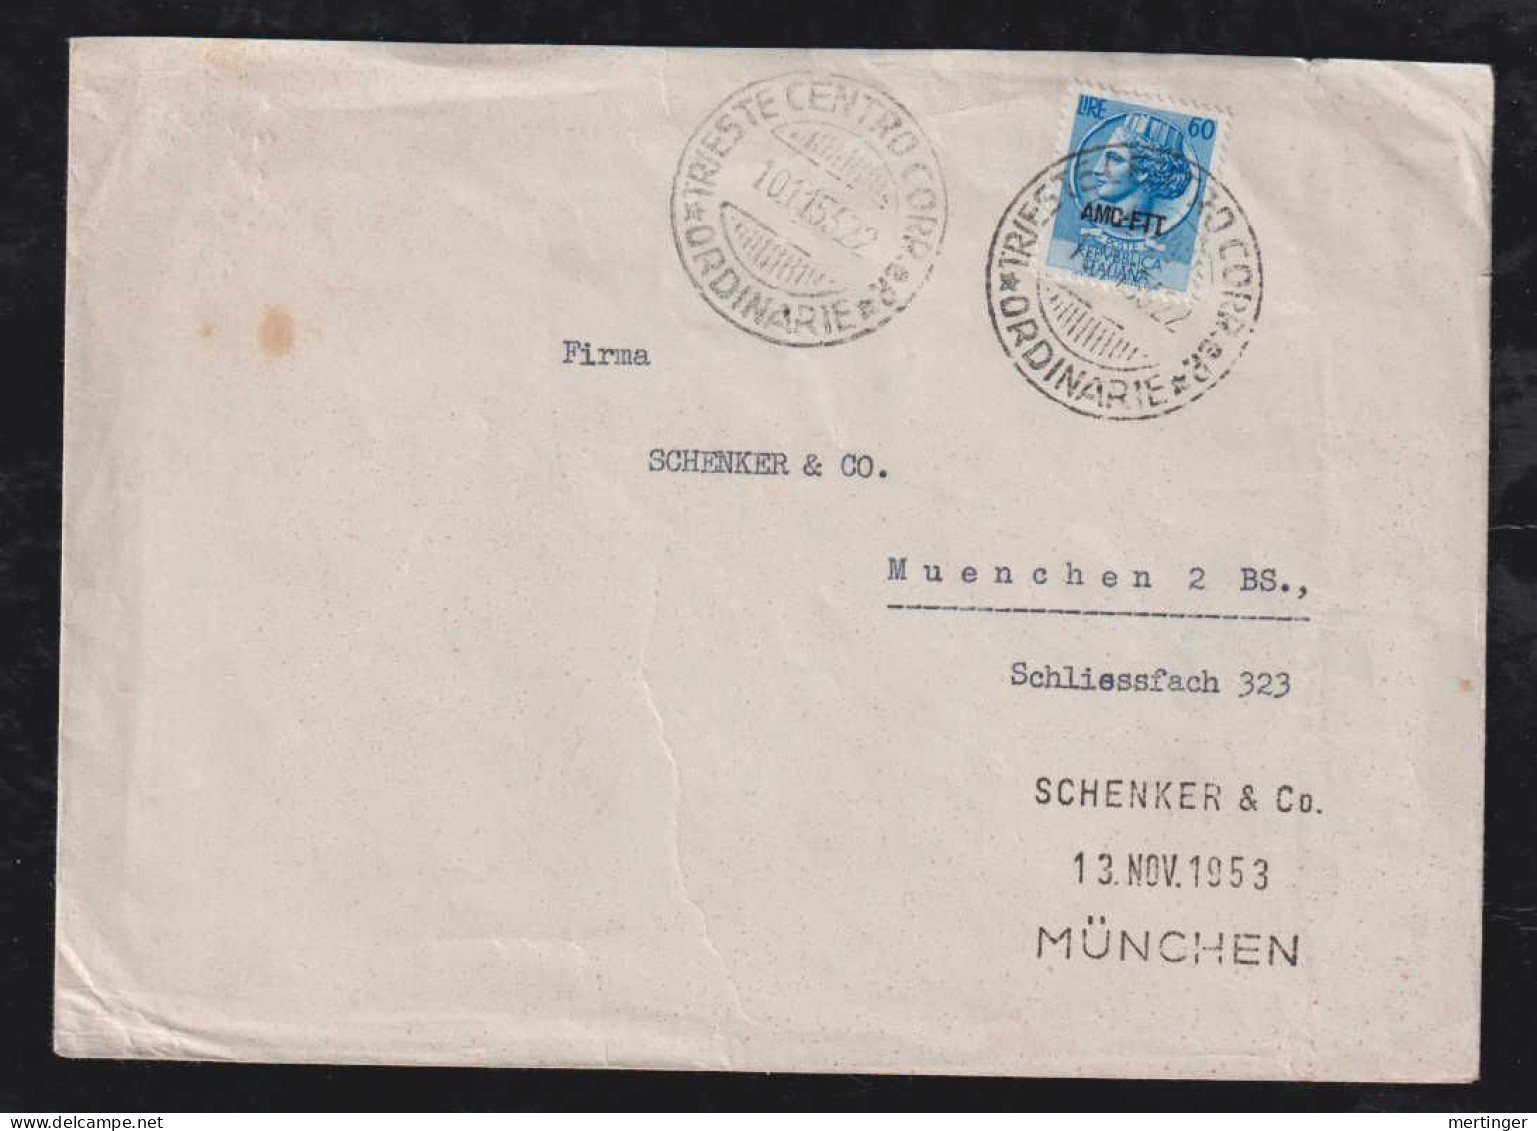 Italy Trieste 1953 Cover To MÜNCHEN Germany - Used